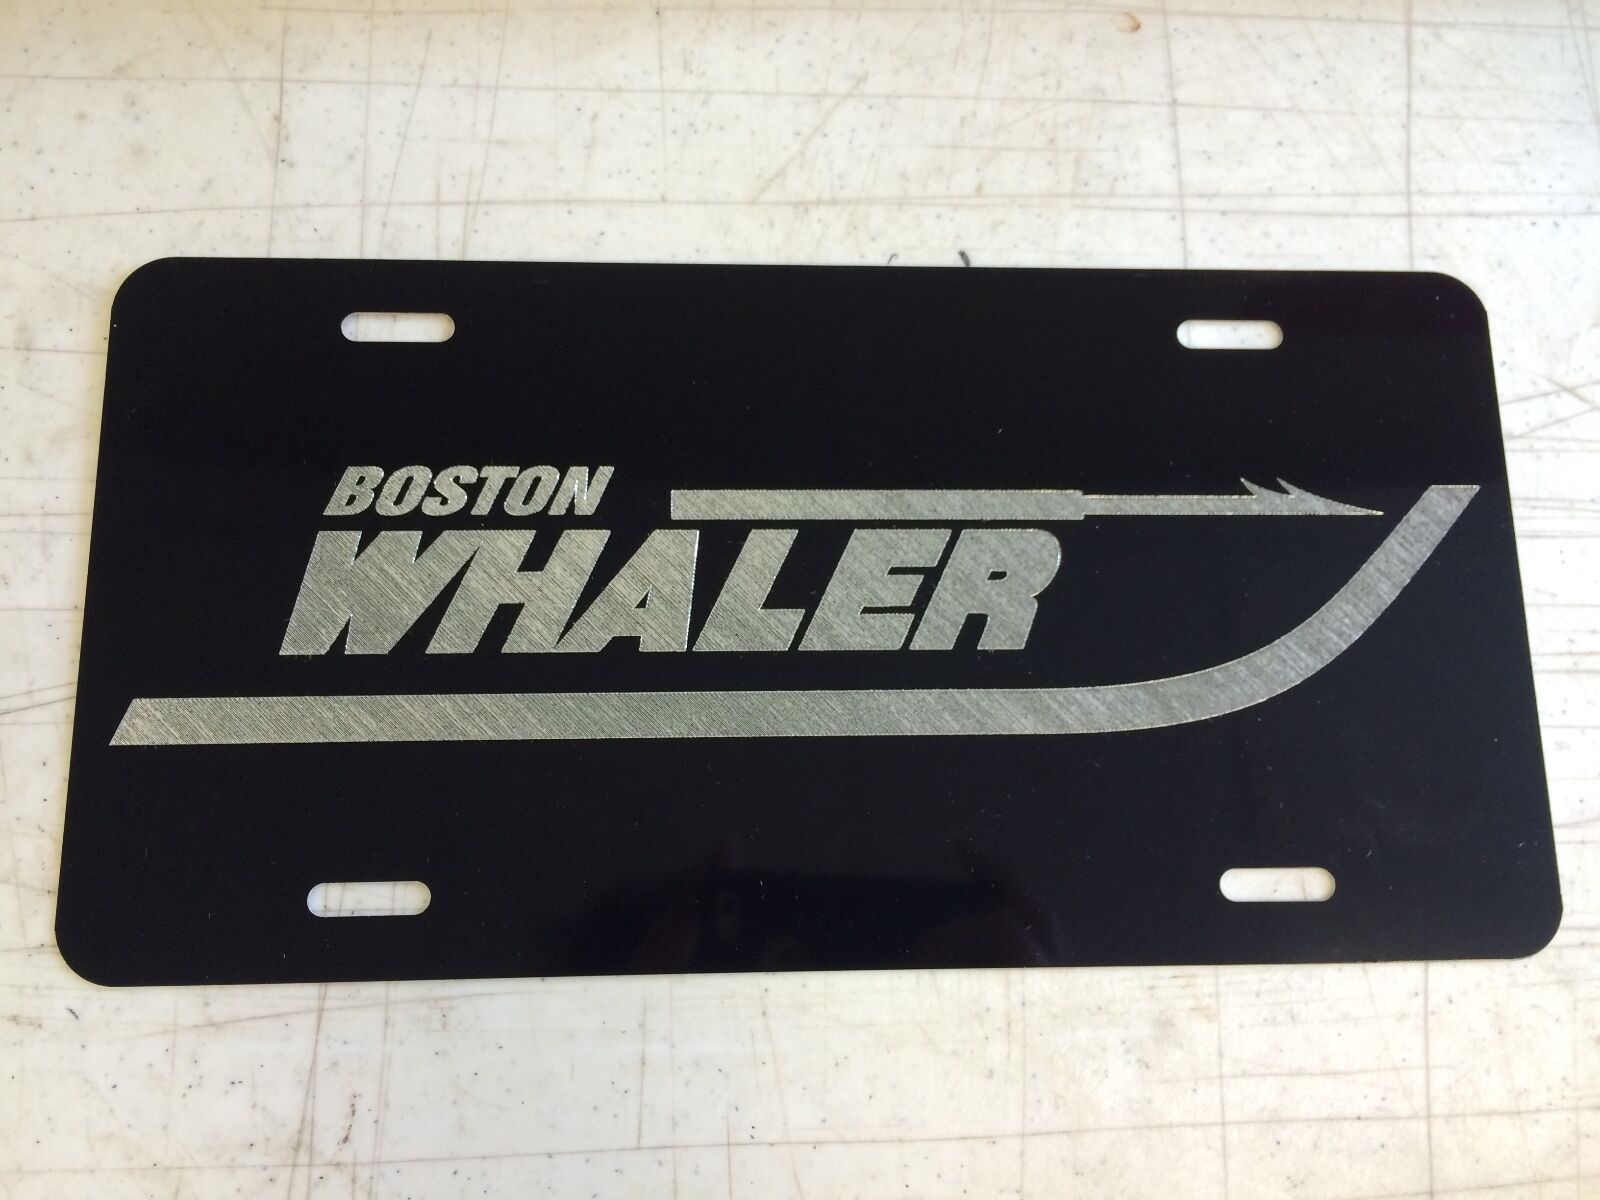 BOSTON WHALER Car Tag Diamond Etched on Aluminum License Plate